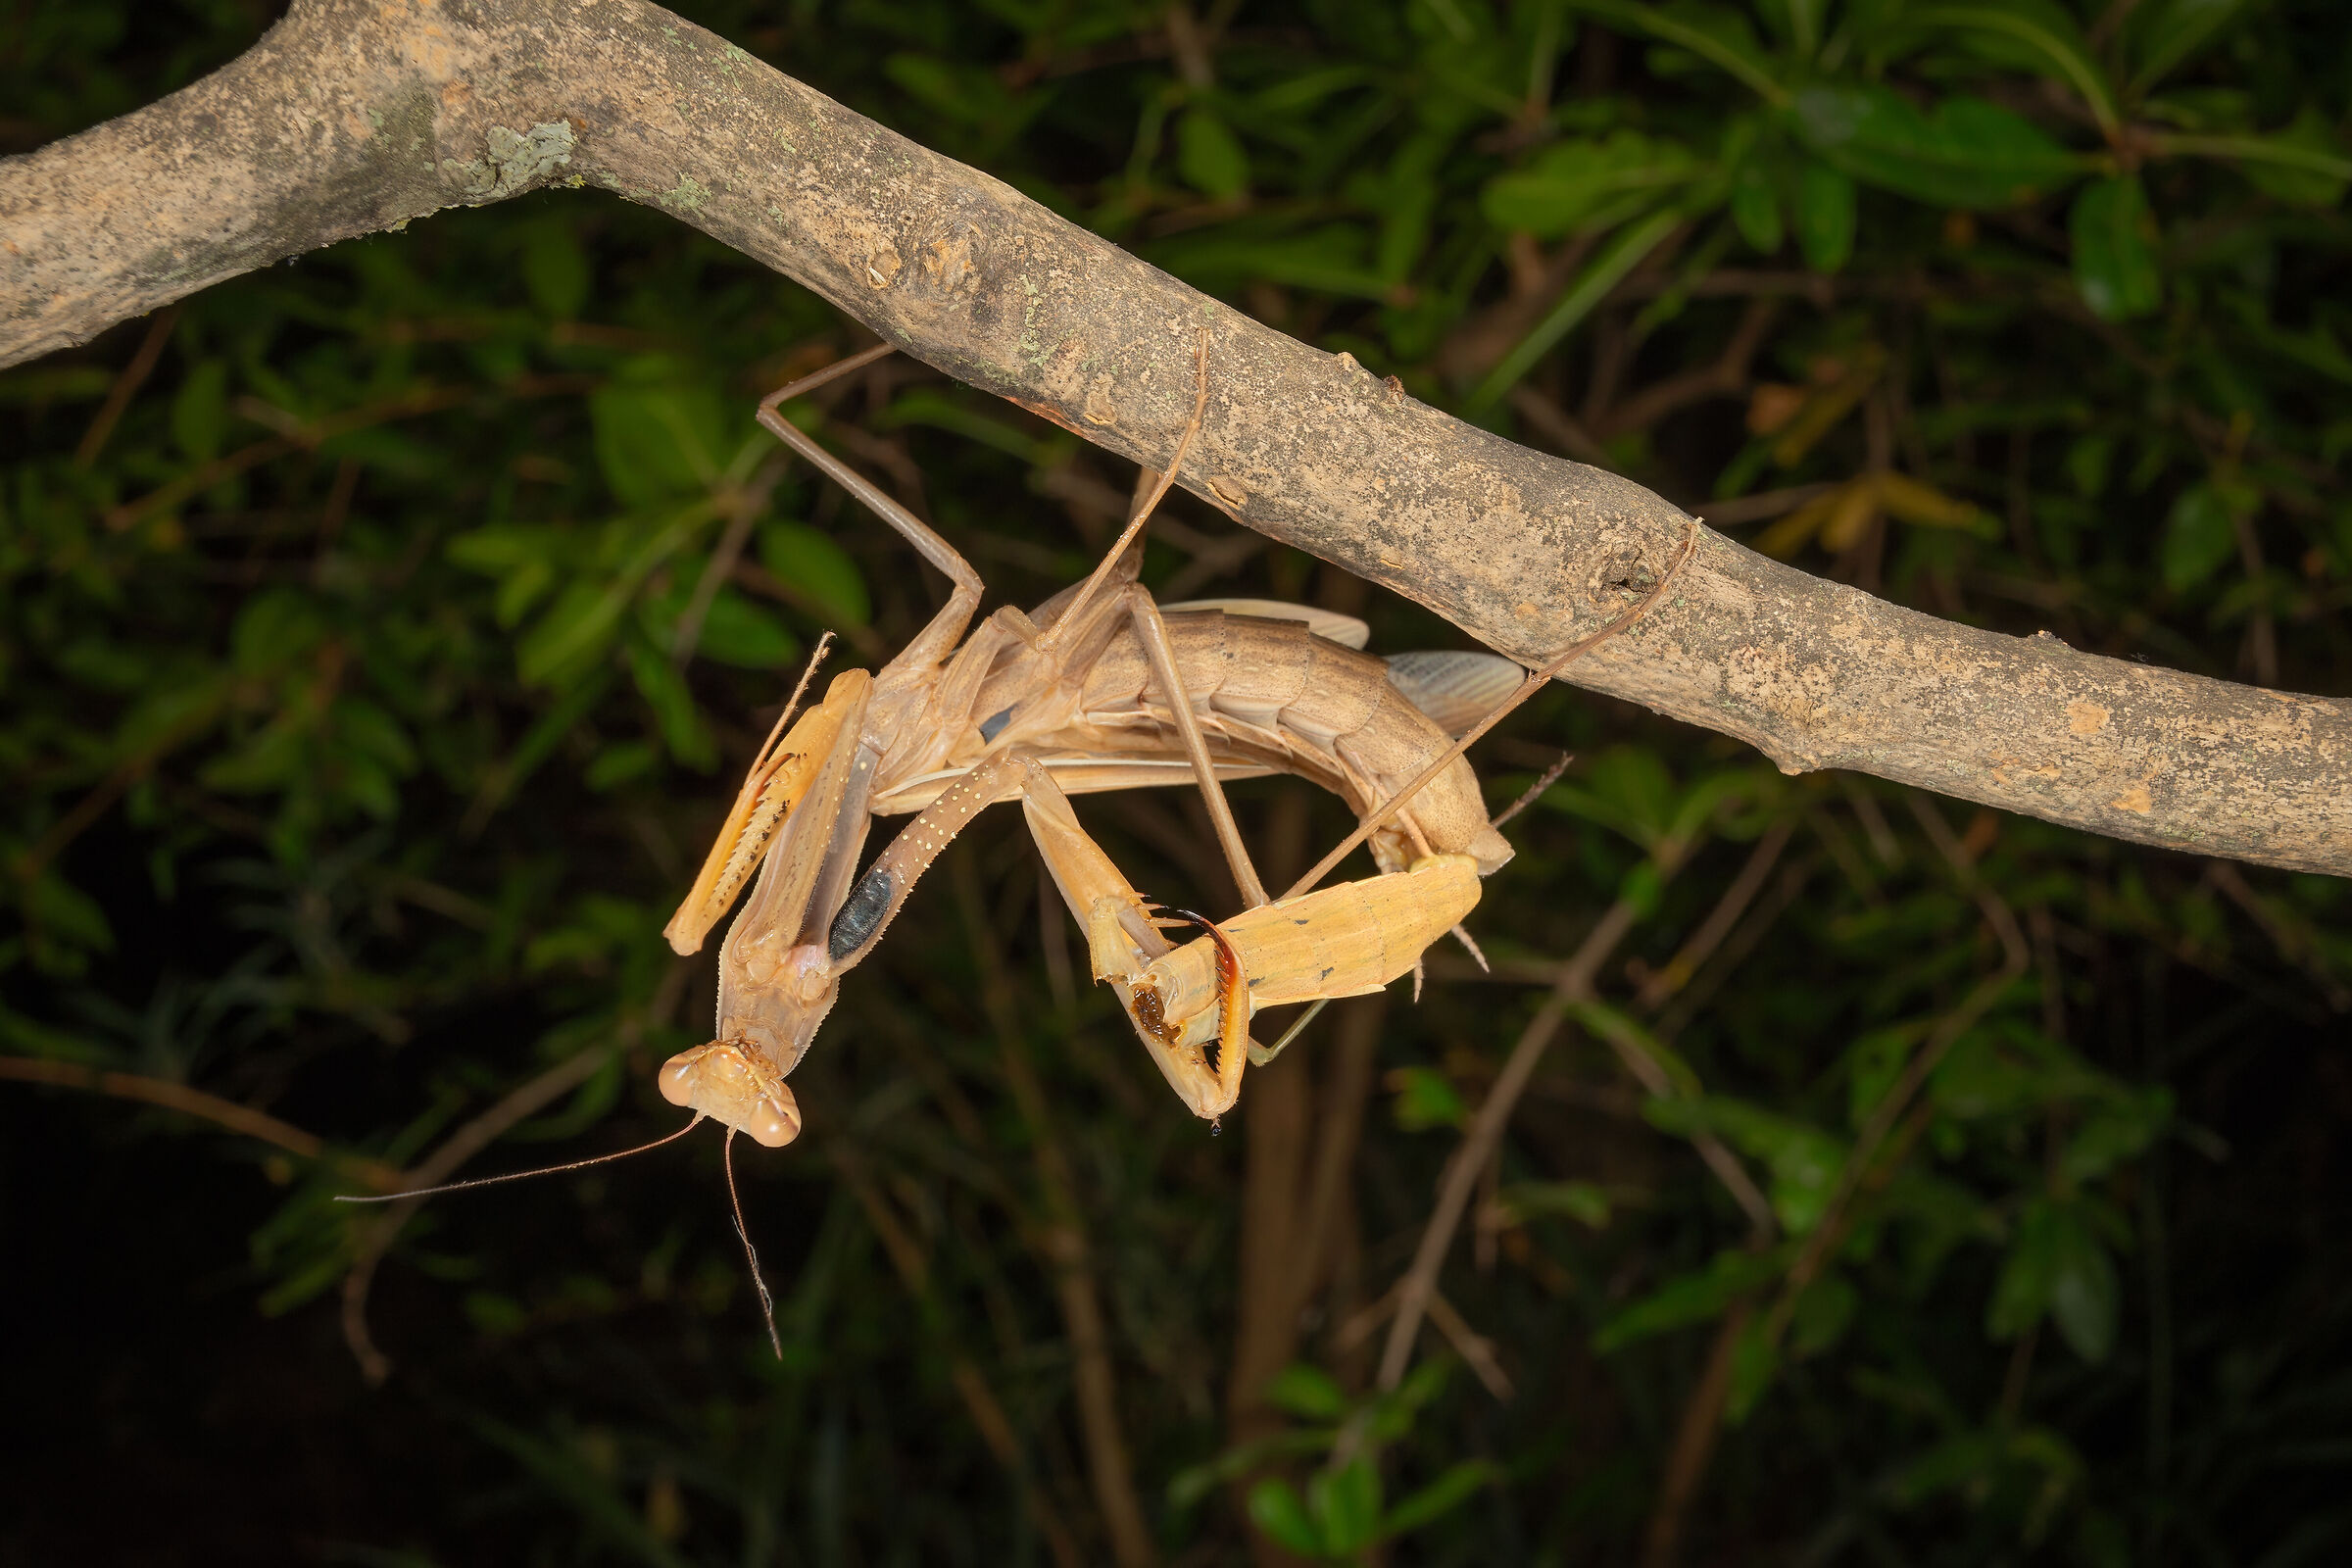 The Mating of the Mantis, 13...